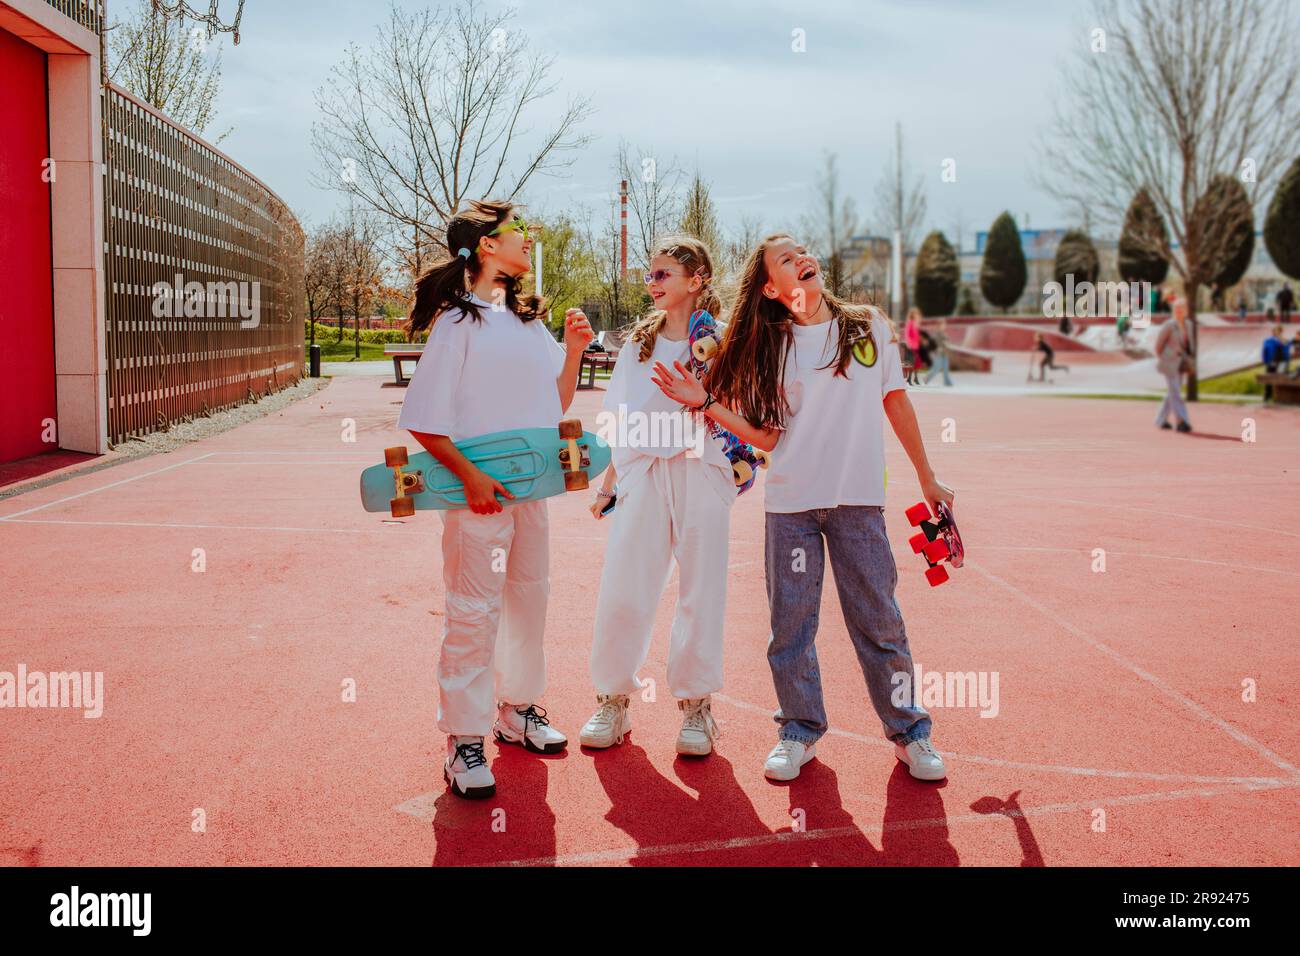 Teenage friends with skateboard spending leisure time at playground Stock Photo